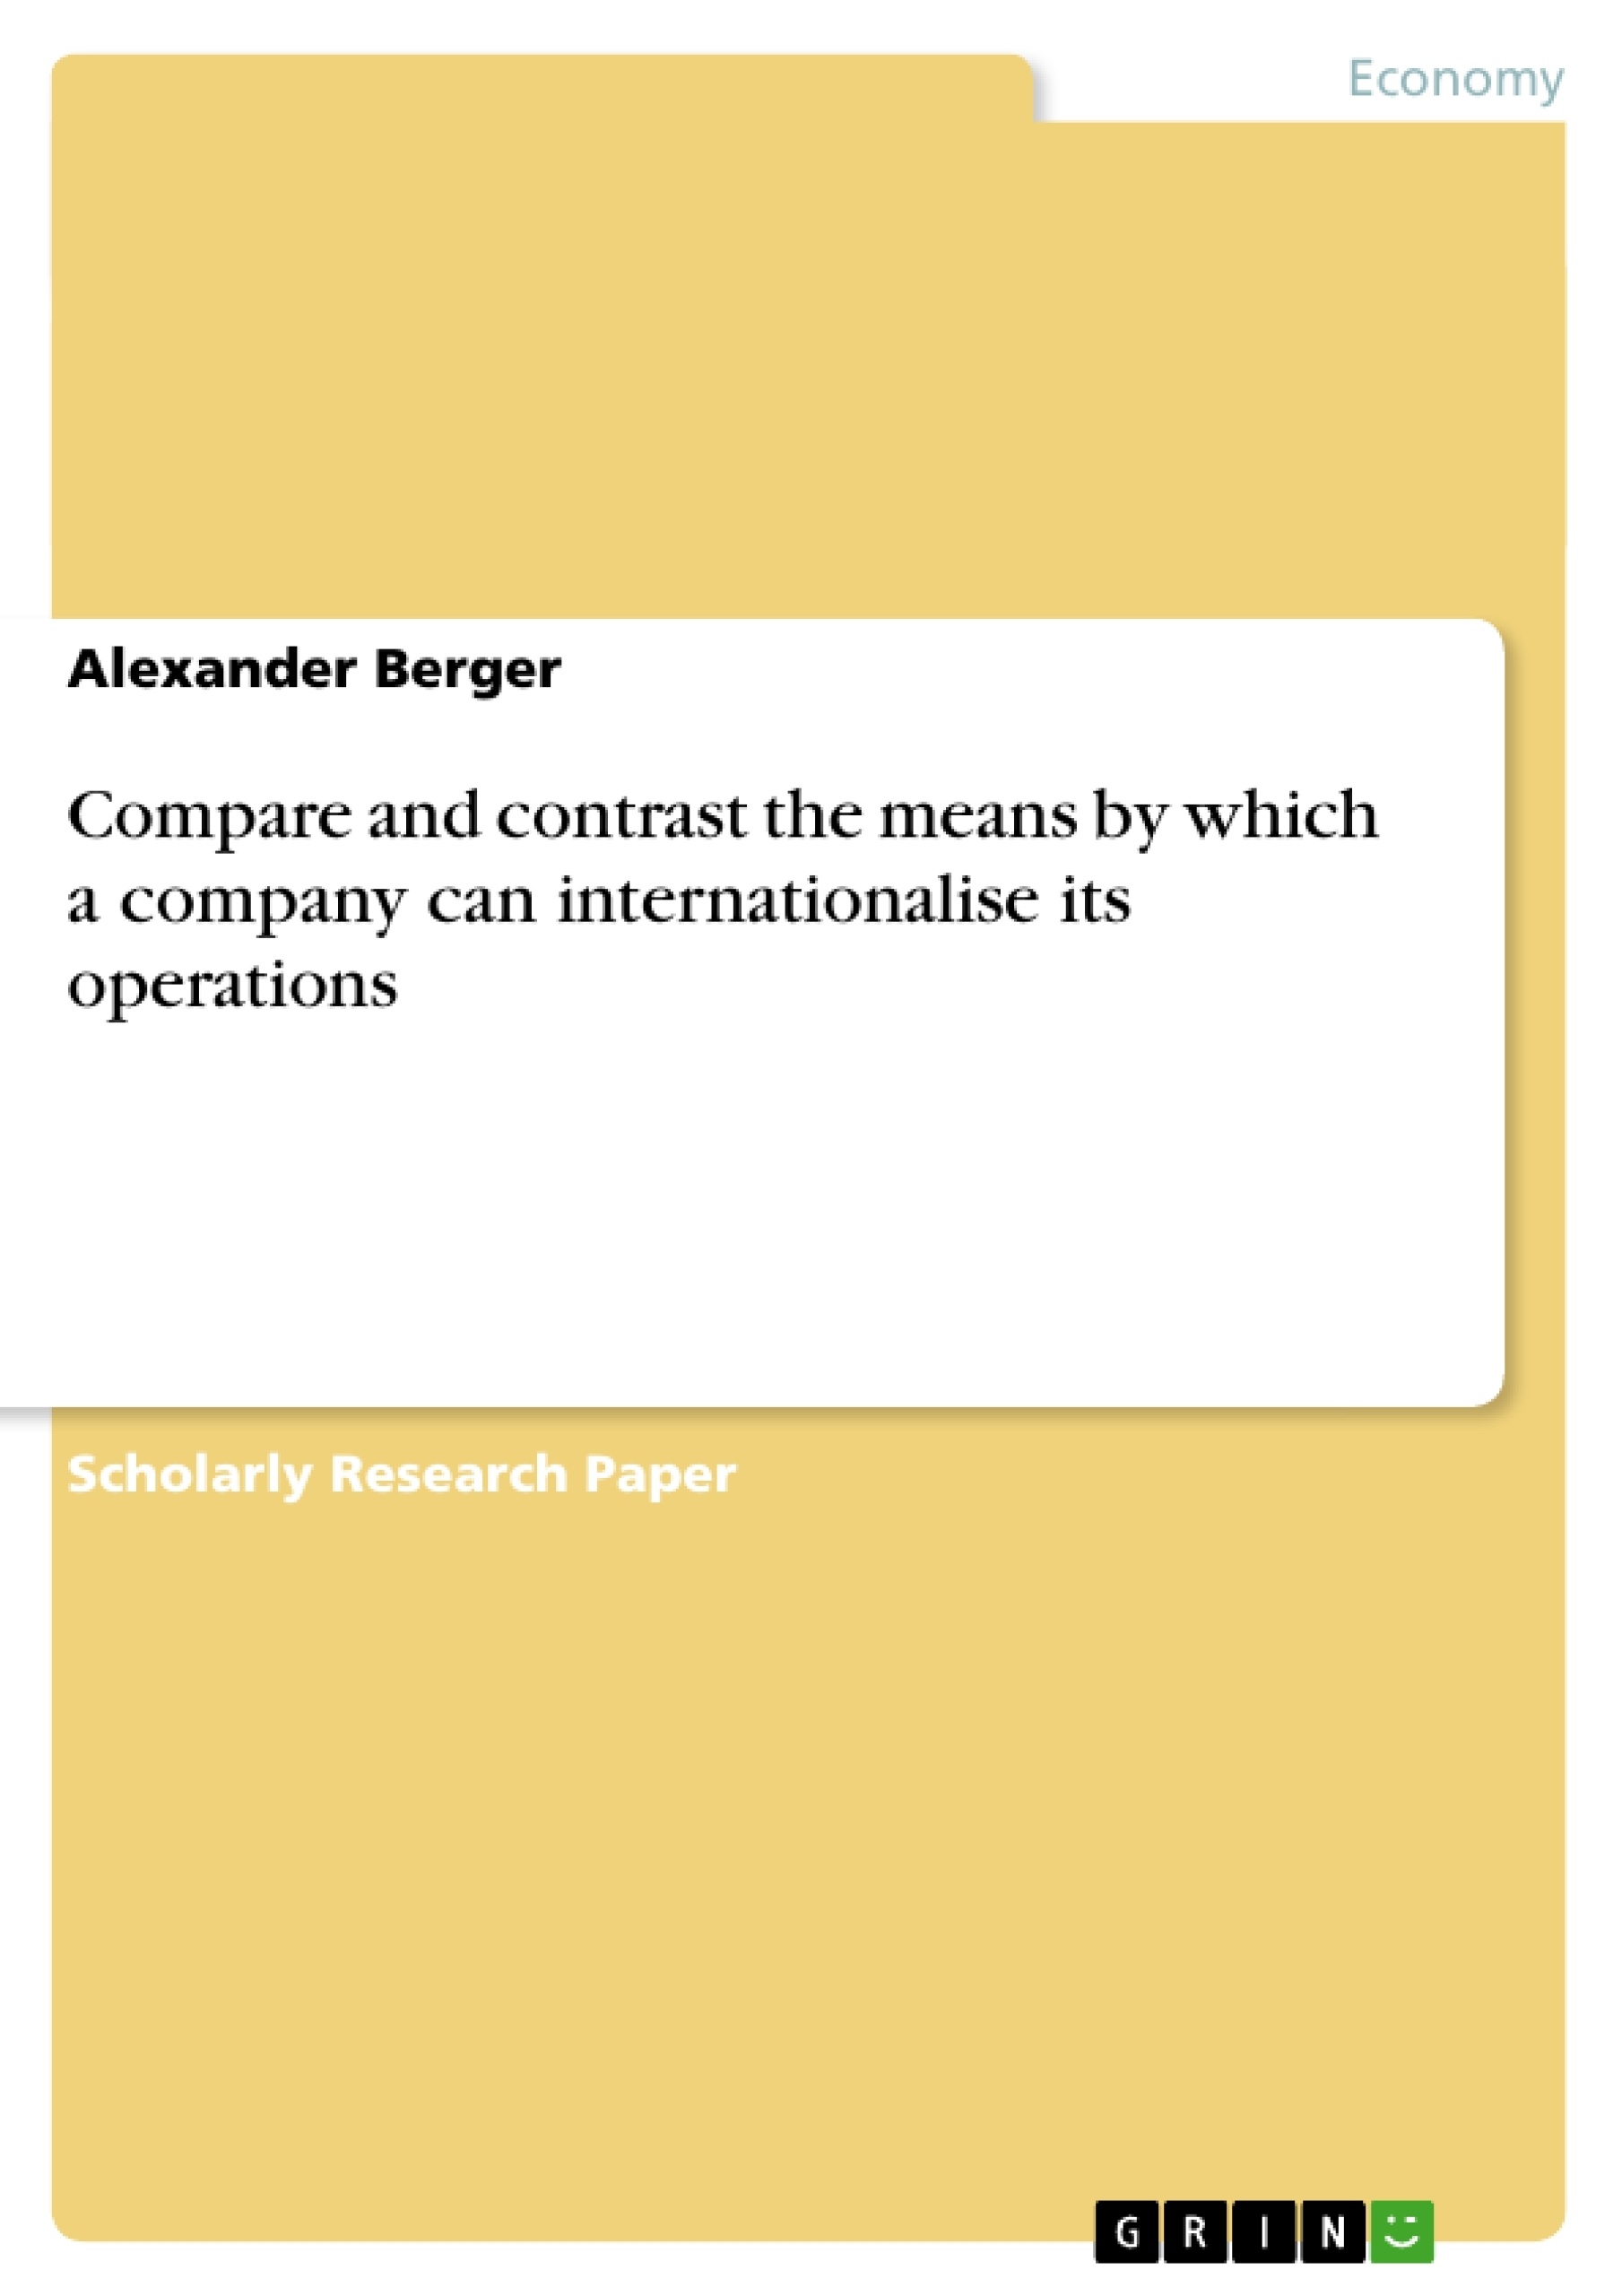 Title: Compare and contrast the means by which a company can internationalise its operations